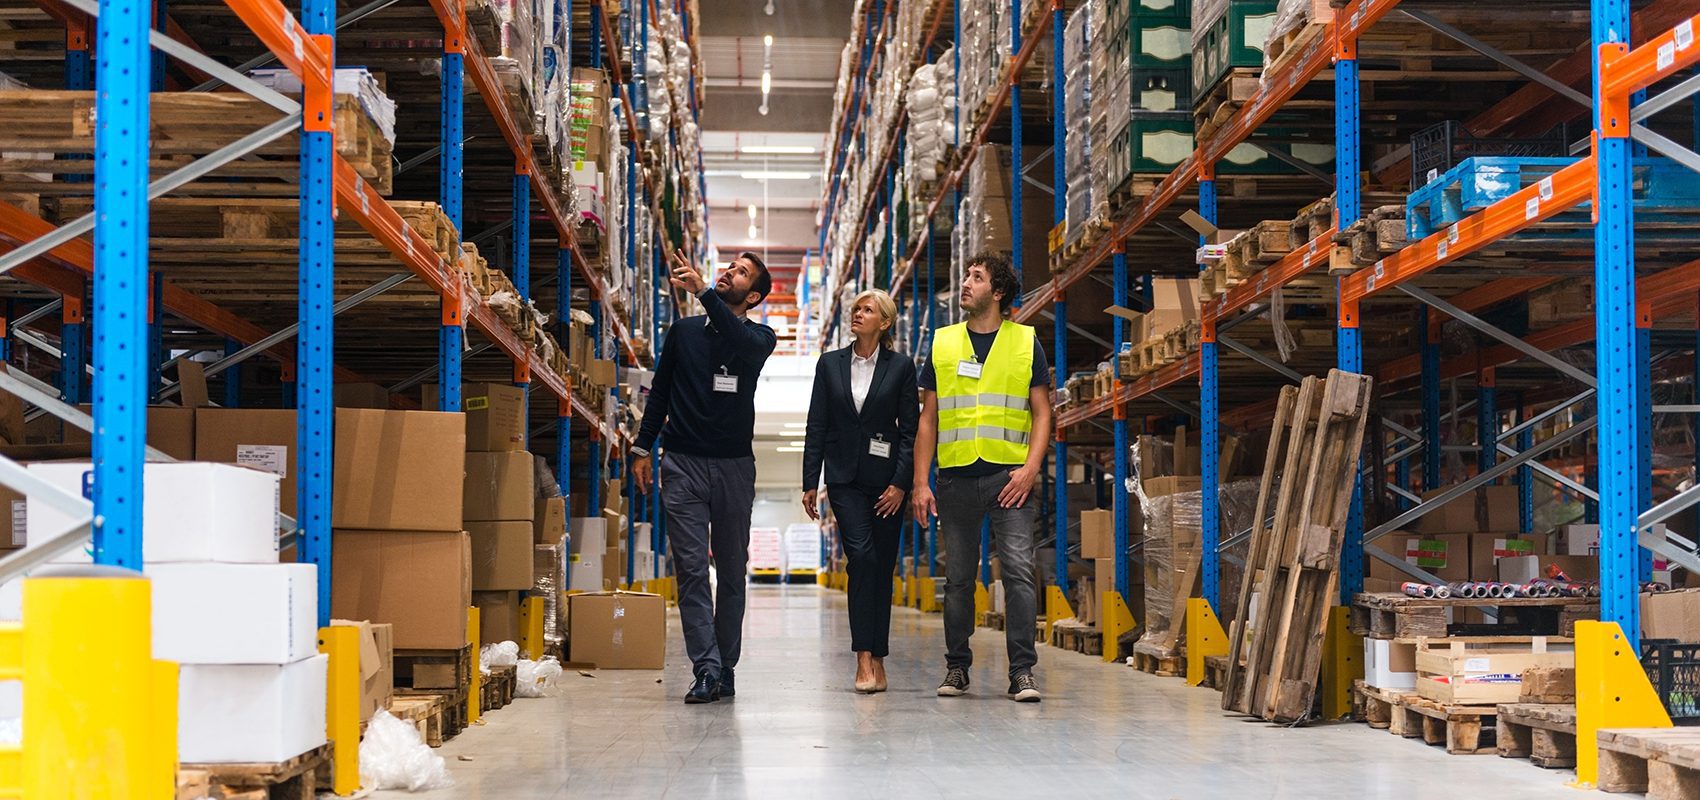 Using an intelligent tool to ease supply chain issues and move more product.